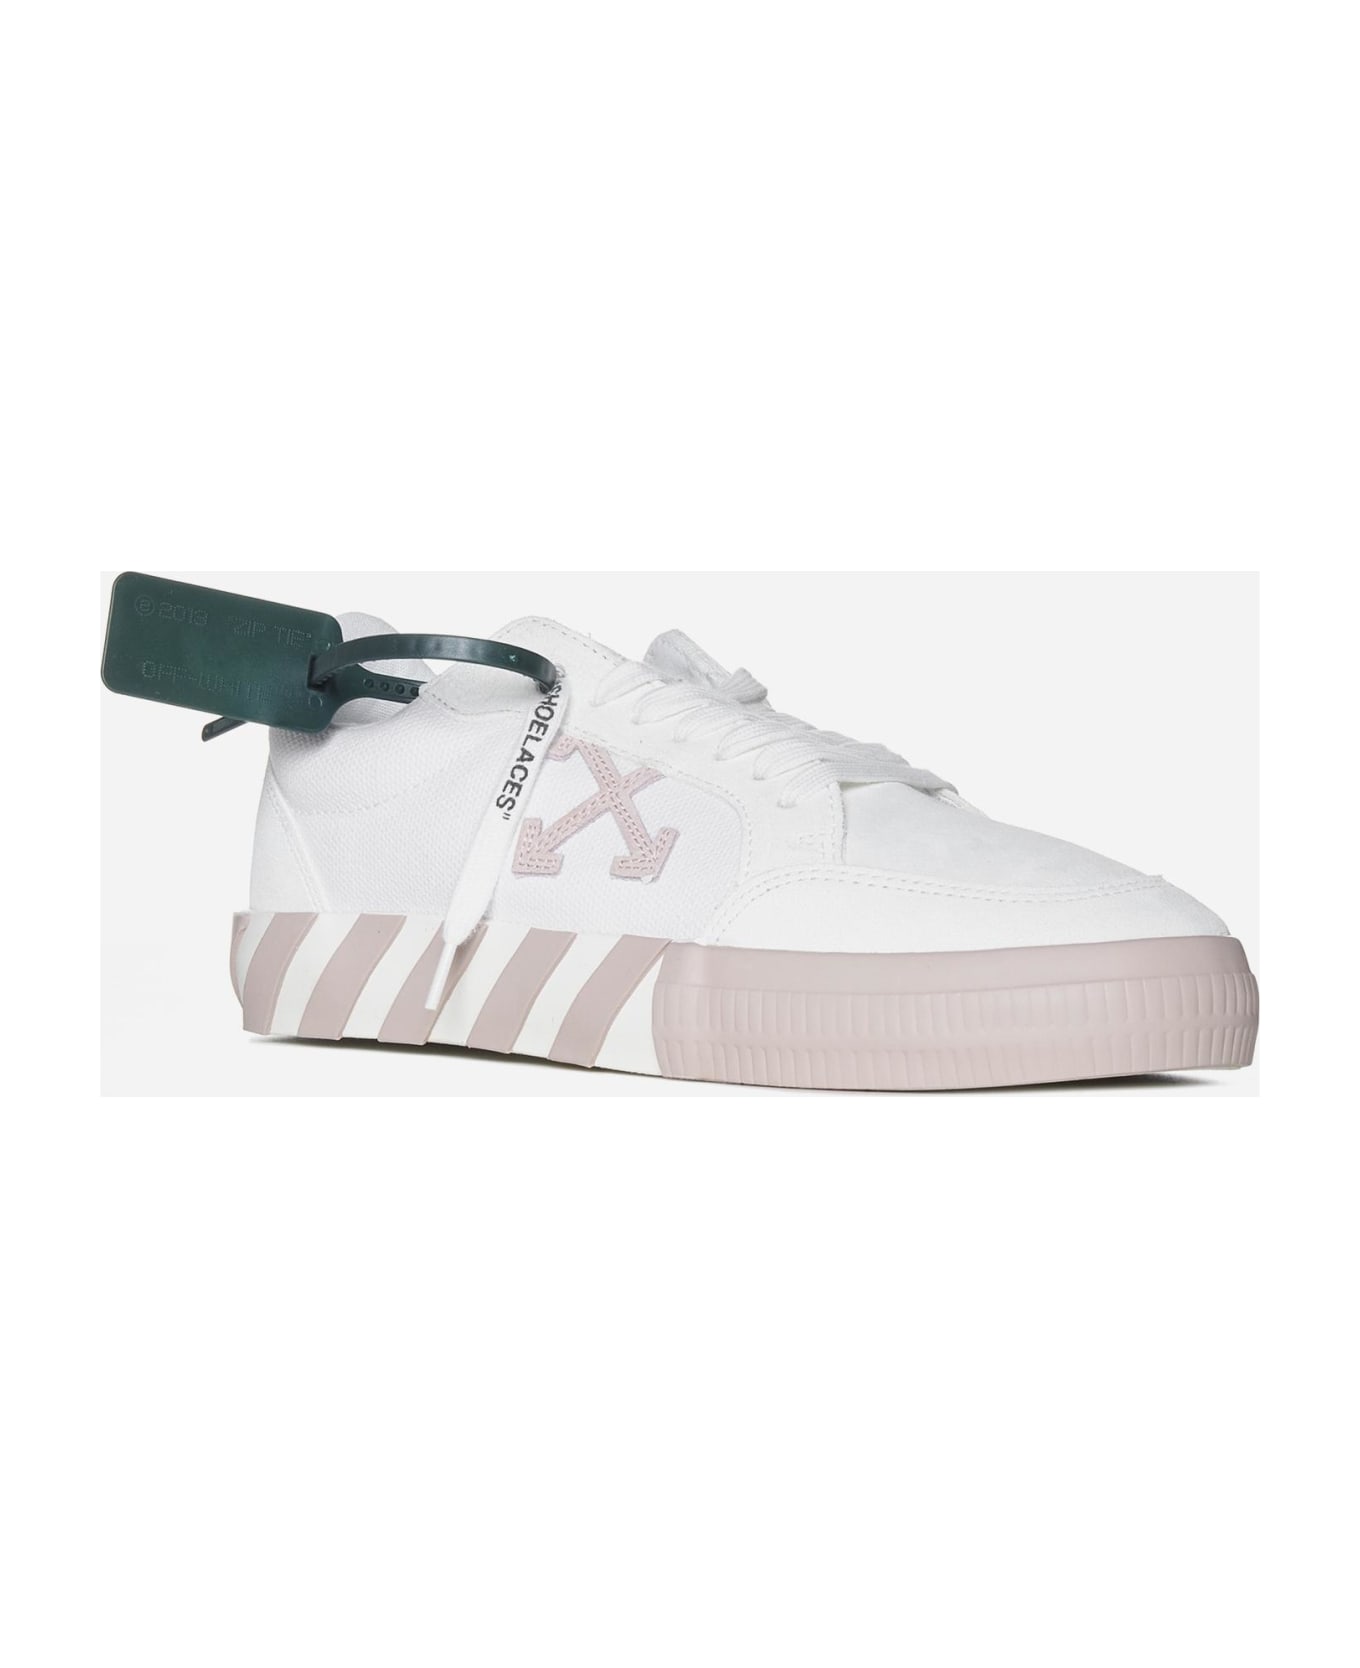 Off-White Low Vulcanized Canvas Sneakers - Bianco/rosa スニーカー